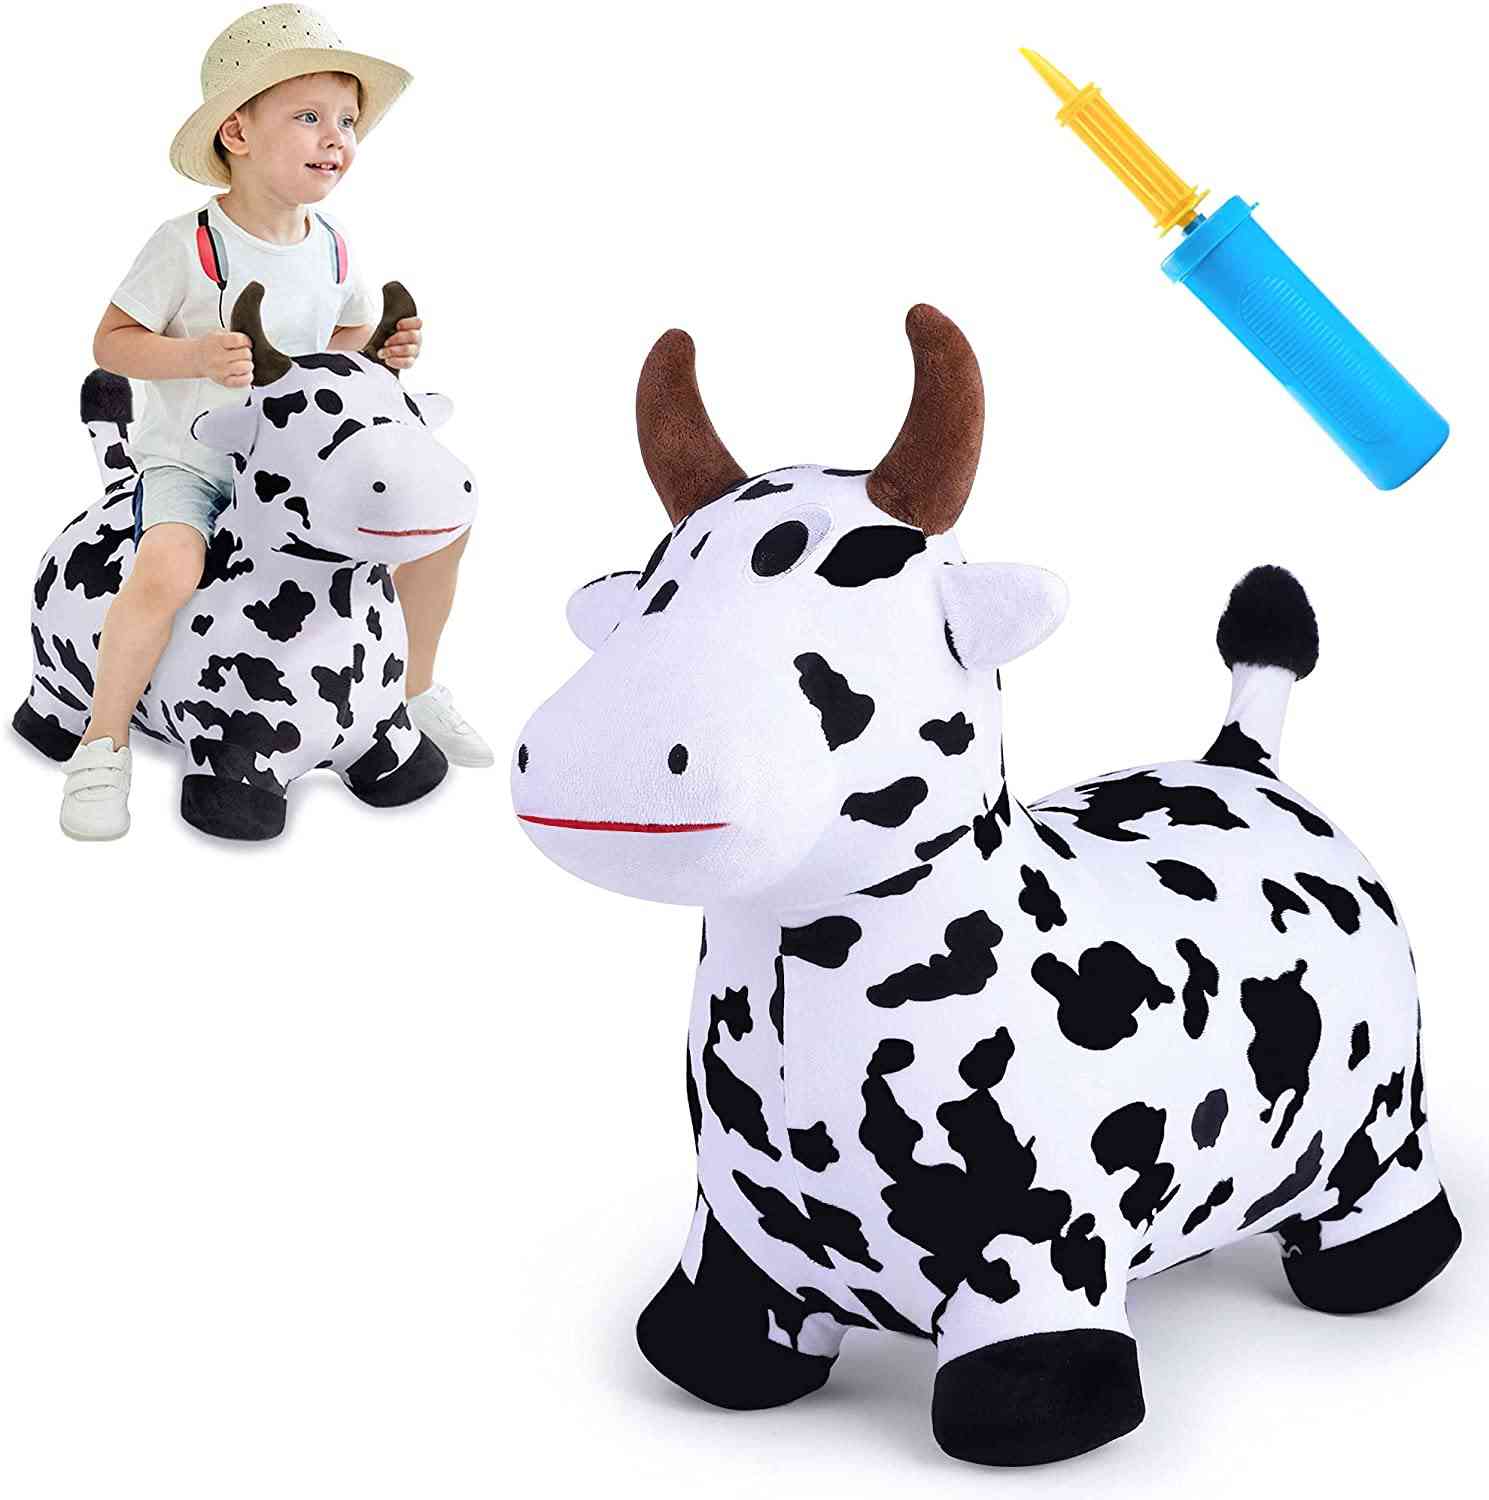 Play Cow Hopping Horse Plush Inflatable Hopper Kids Toy